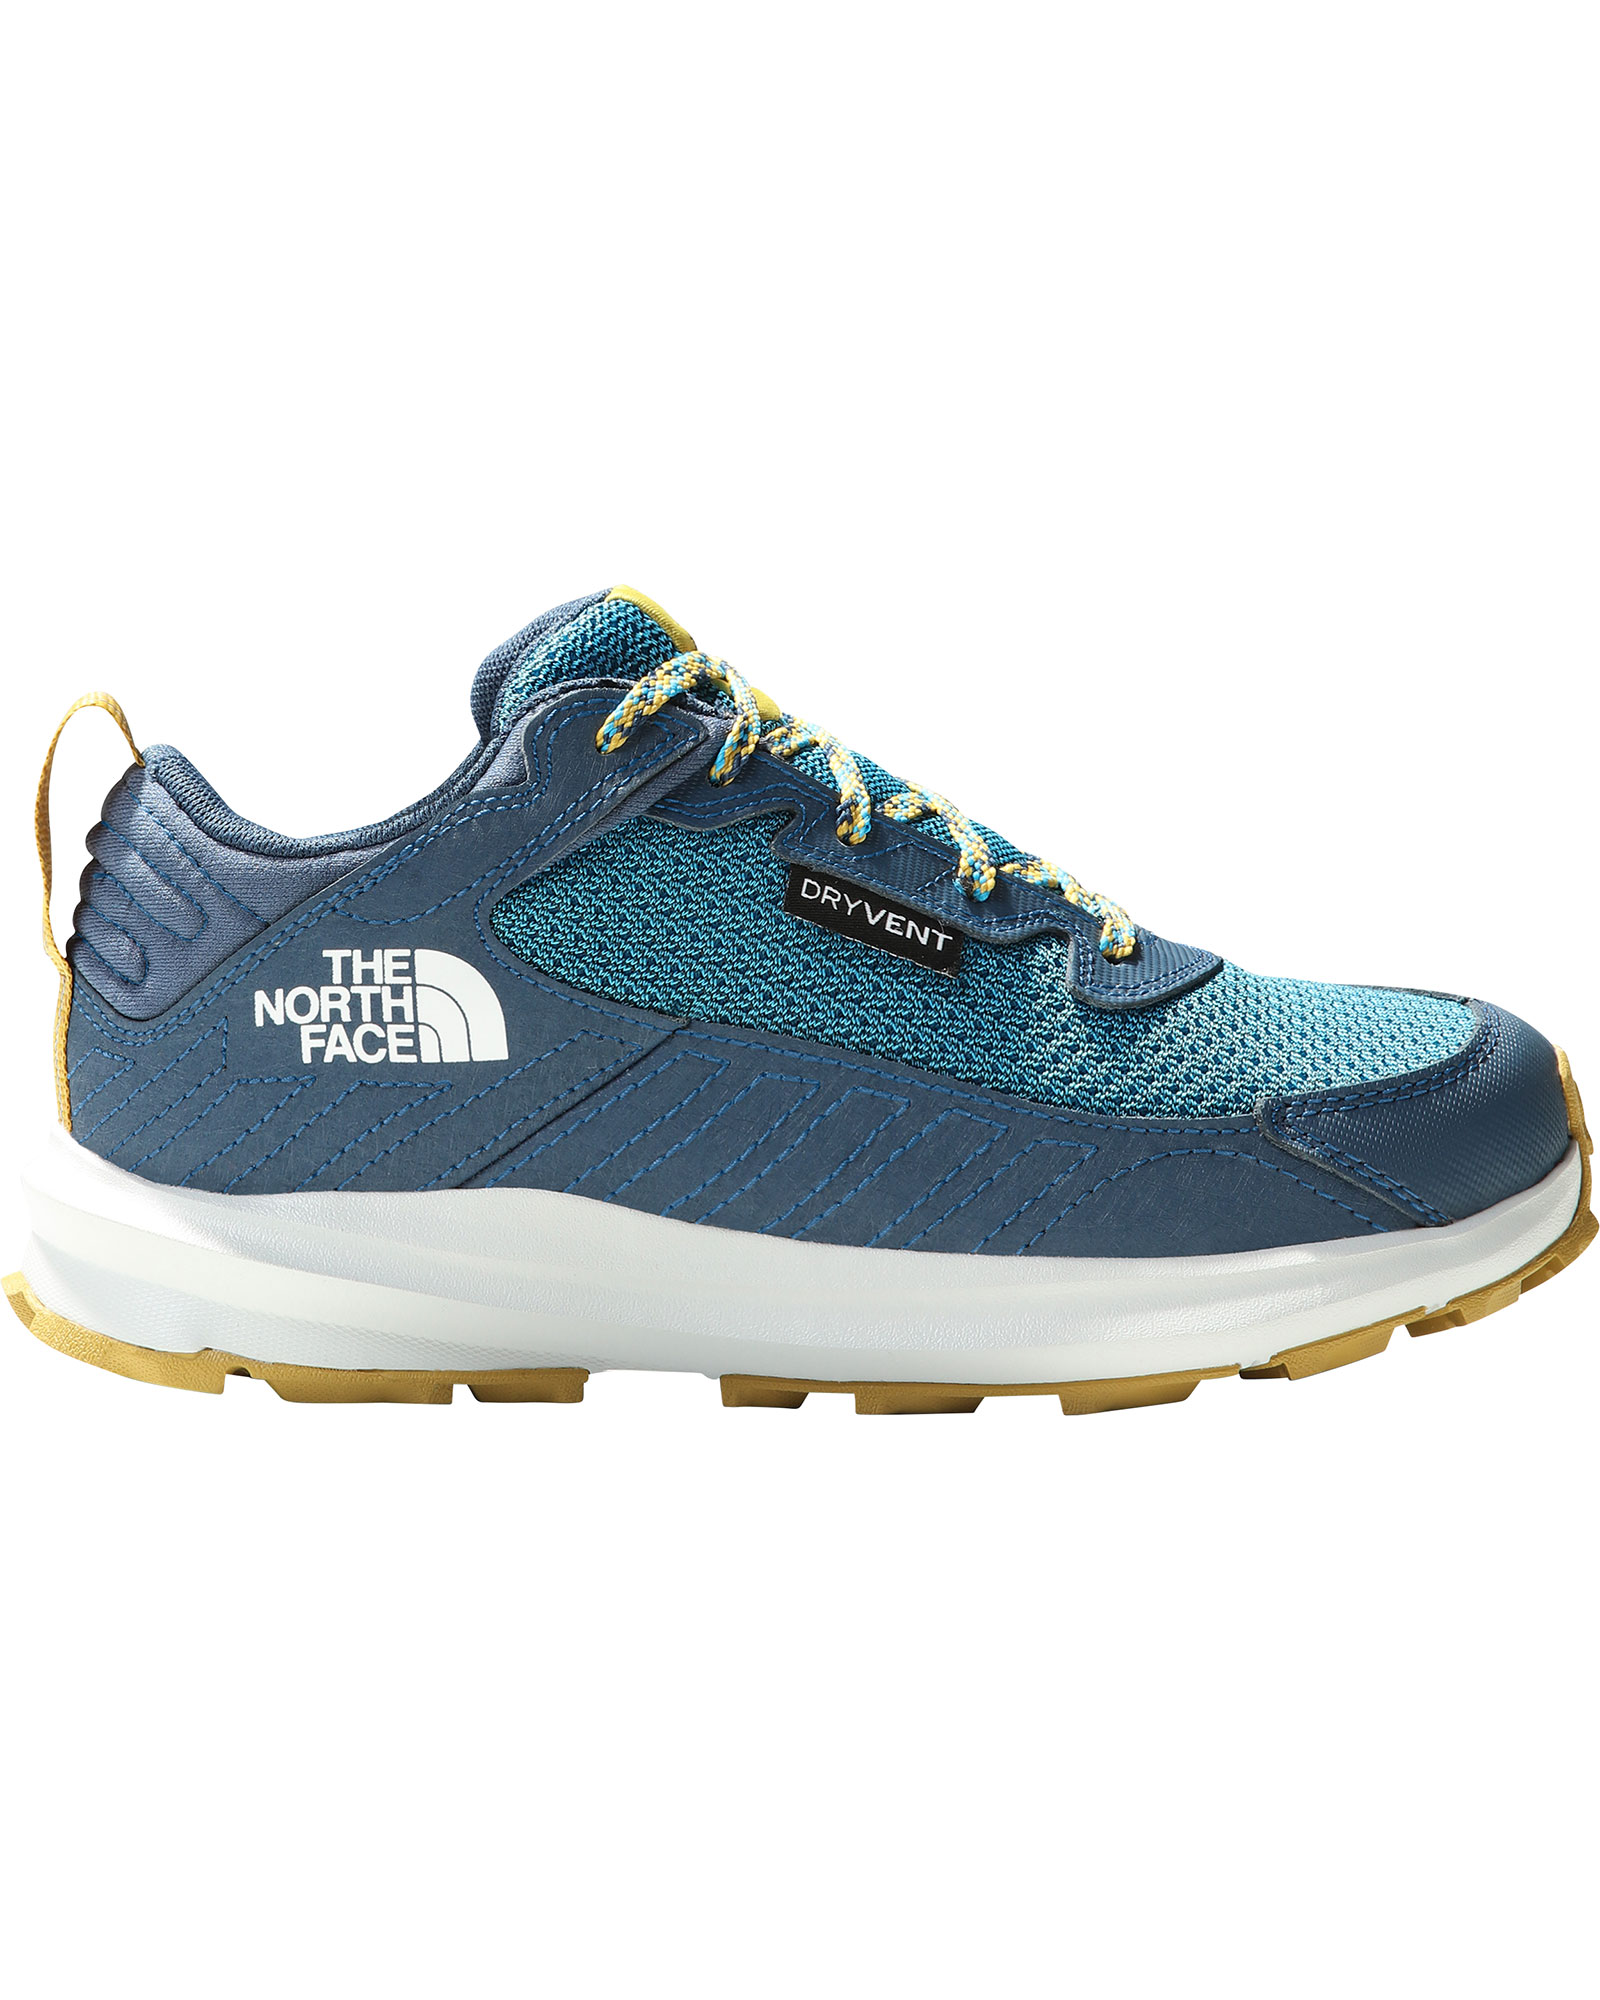 The North Face Youth Fastpack Hiker Kid’s Waterproof Shoes - Acoustic Blue/Shady Blue UK 4